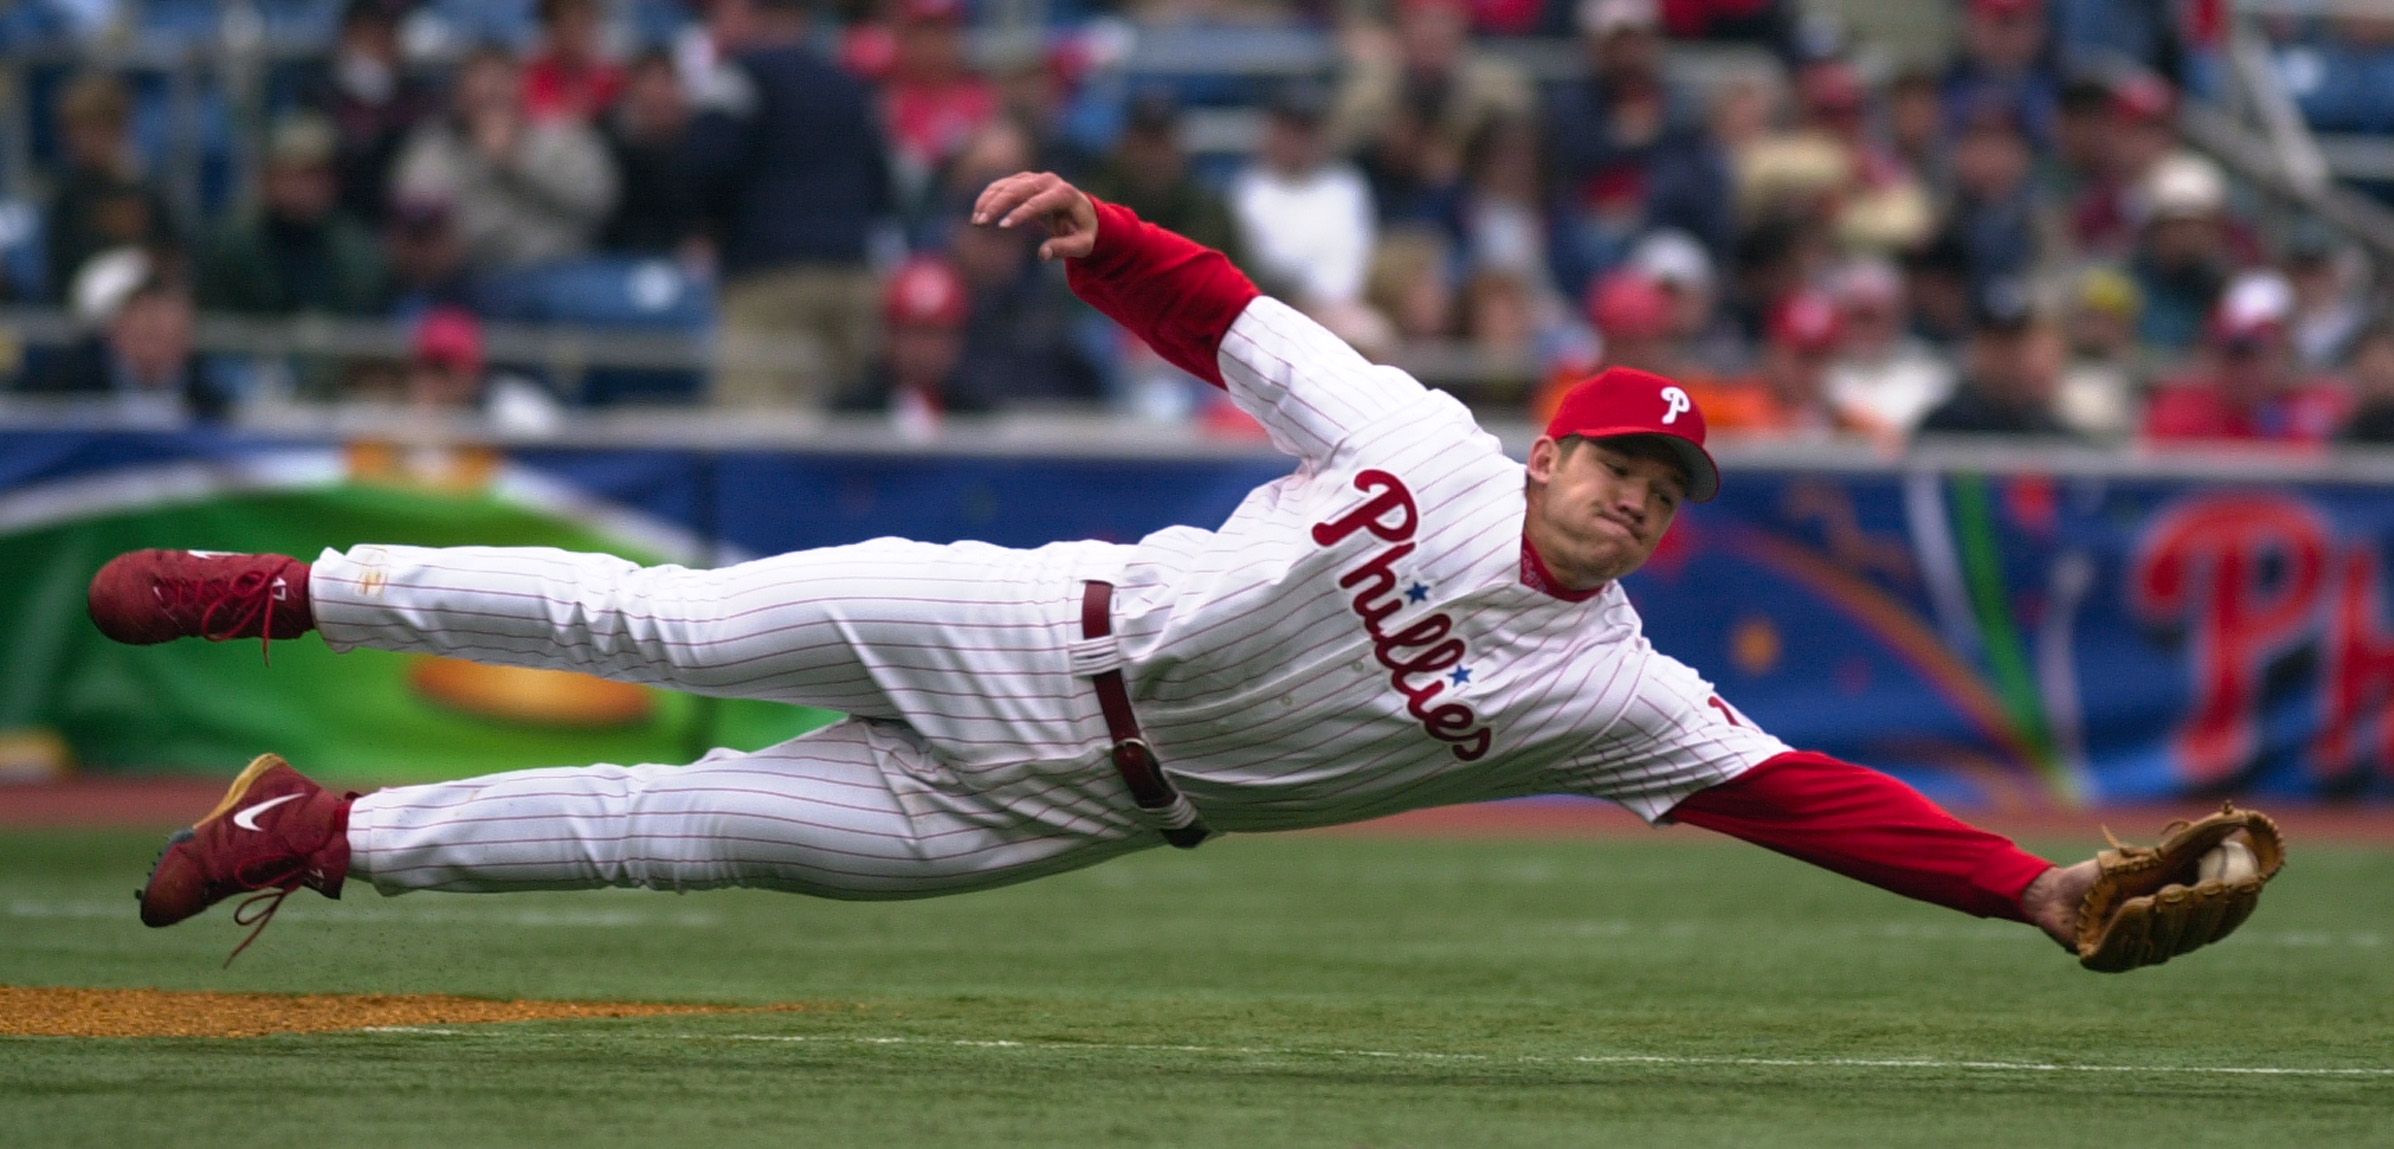 Phillies scout who signed Scott Rolen is suing MLB for age discrimination